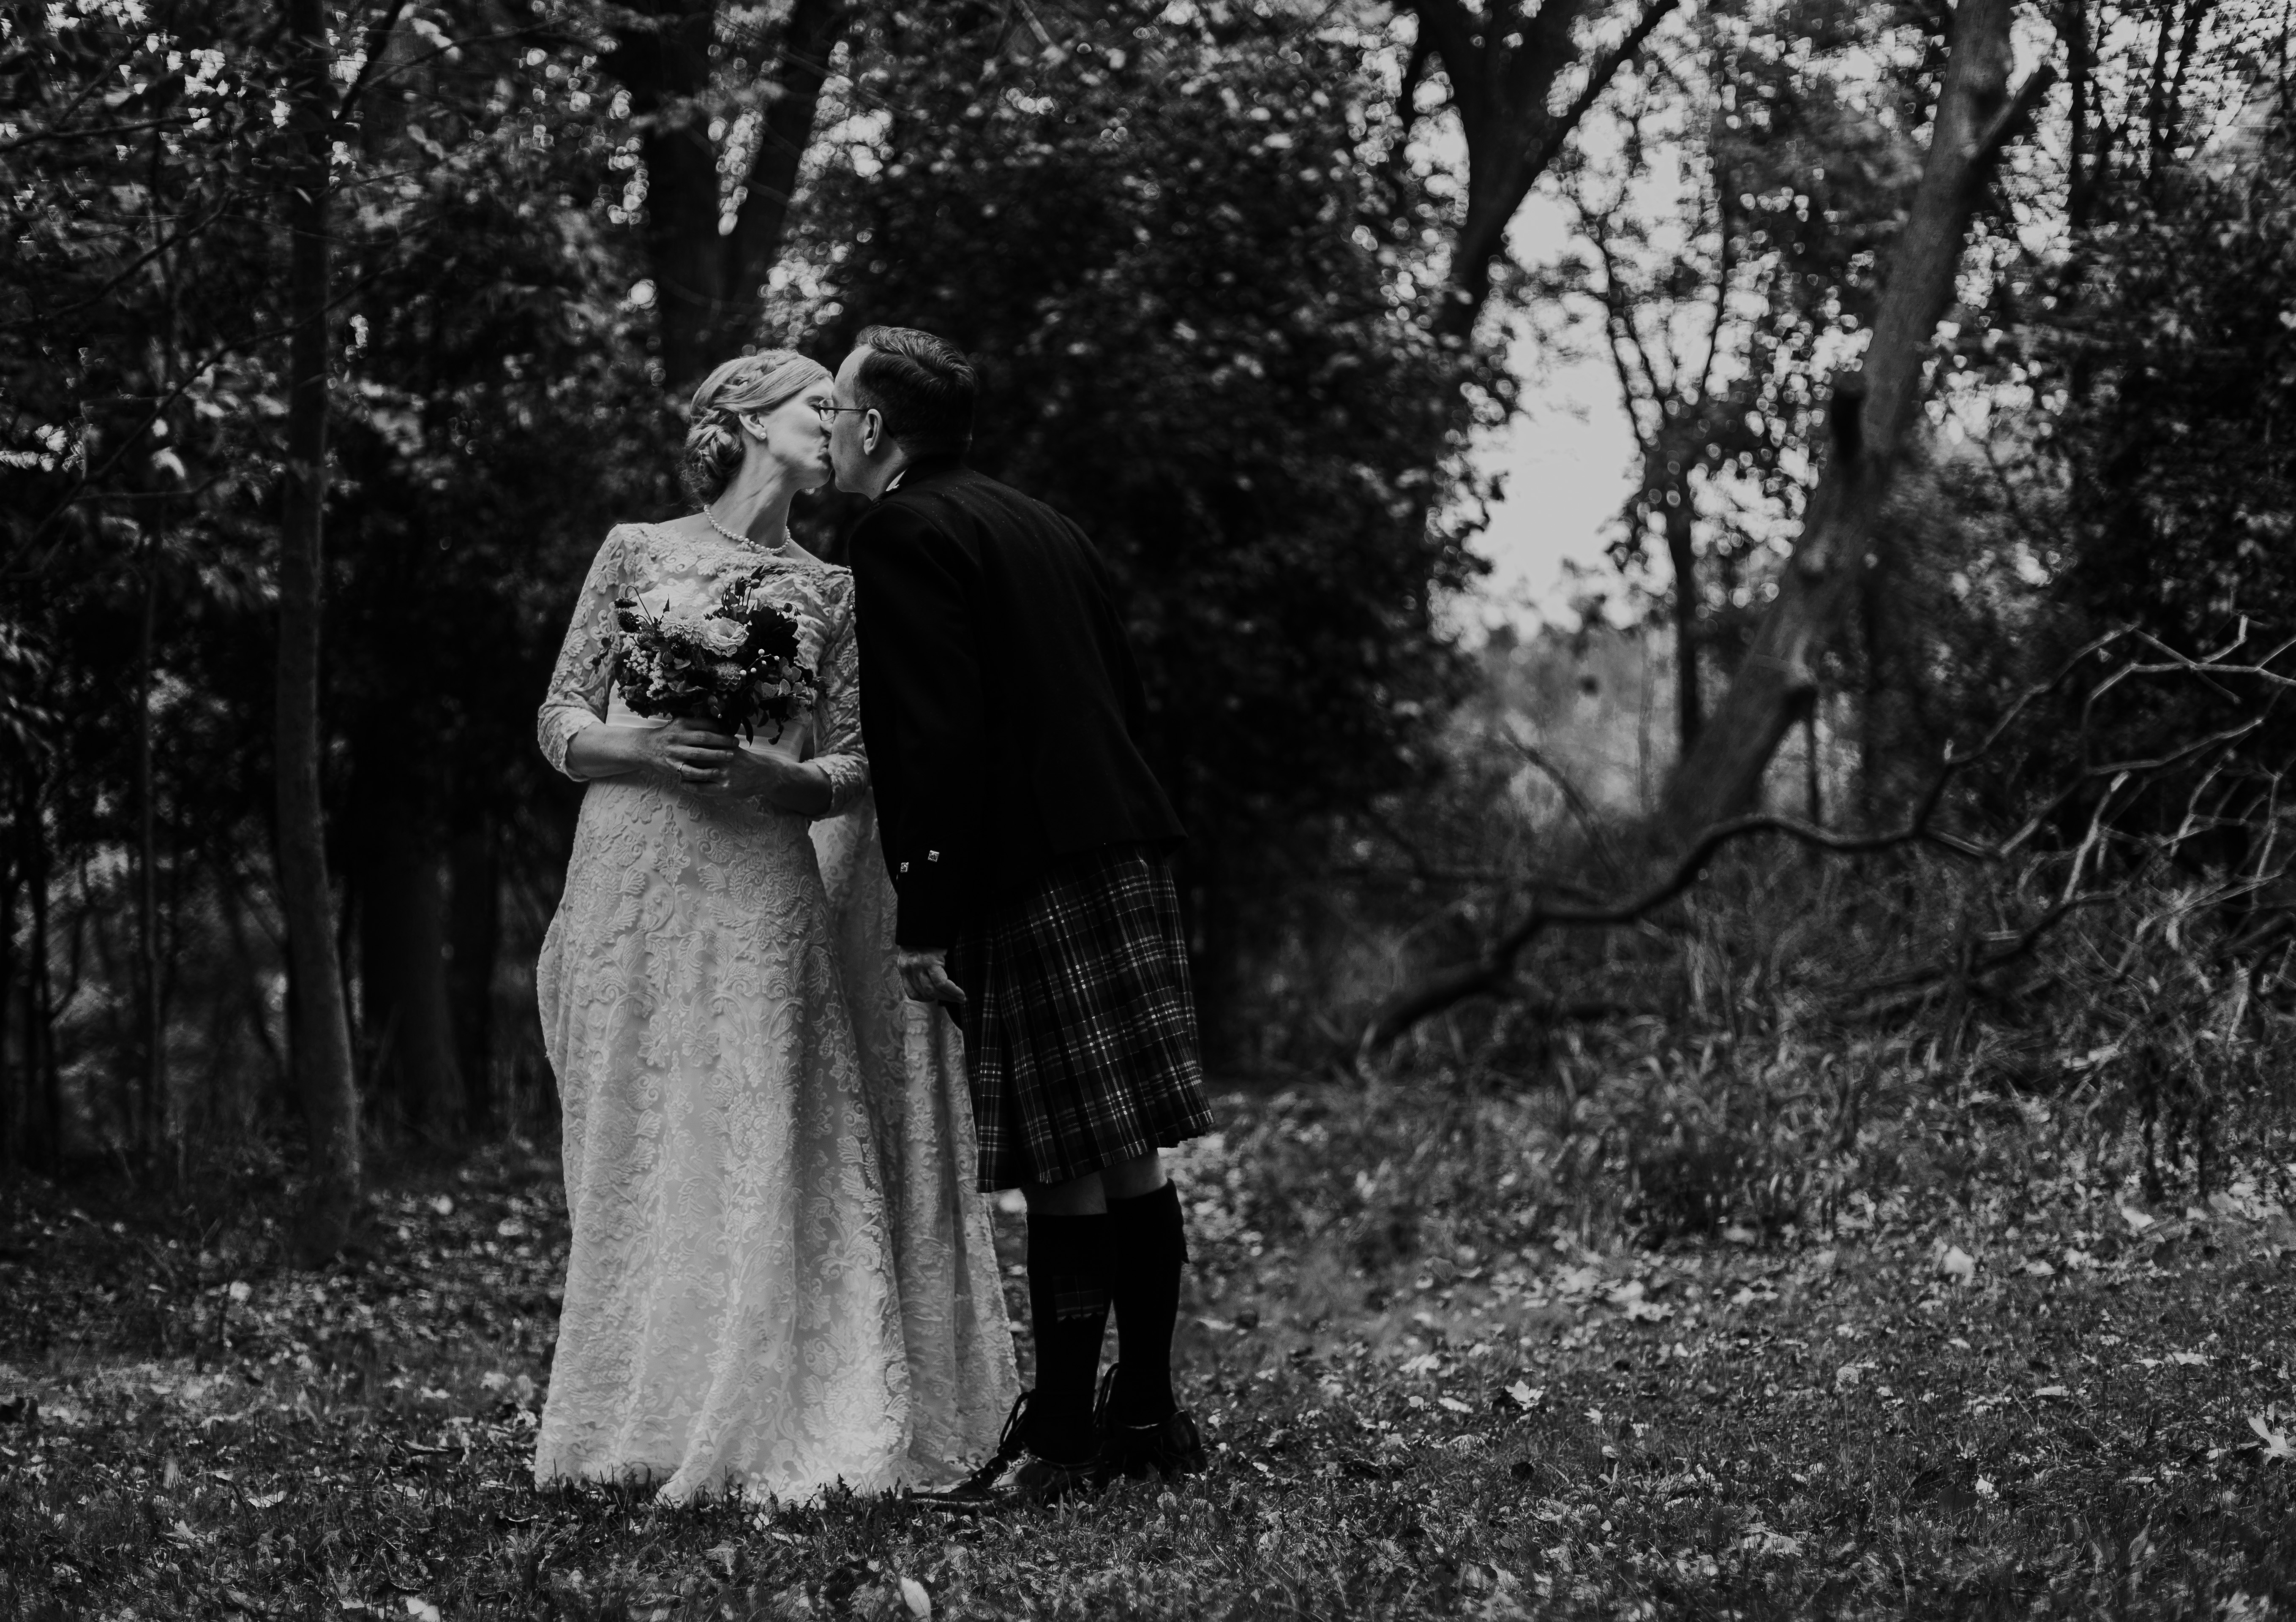 Bride wearing long sleeve lace wedding gown leans over to share a kiss with groom wearing Scottish kilt at their fall Christian wedding